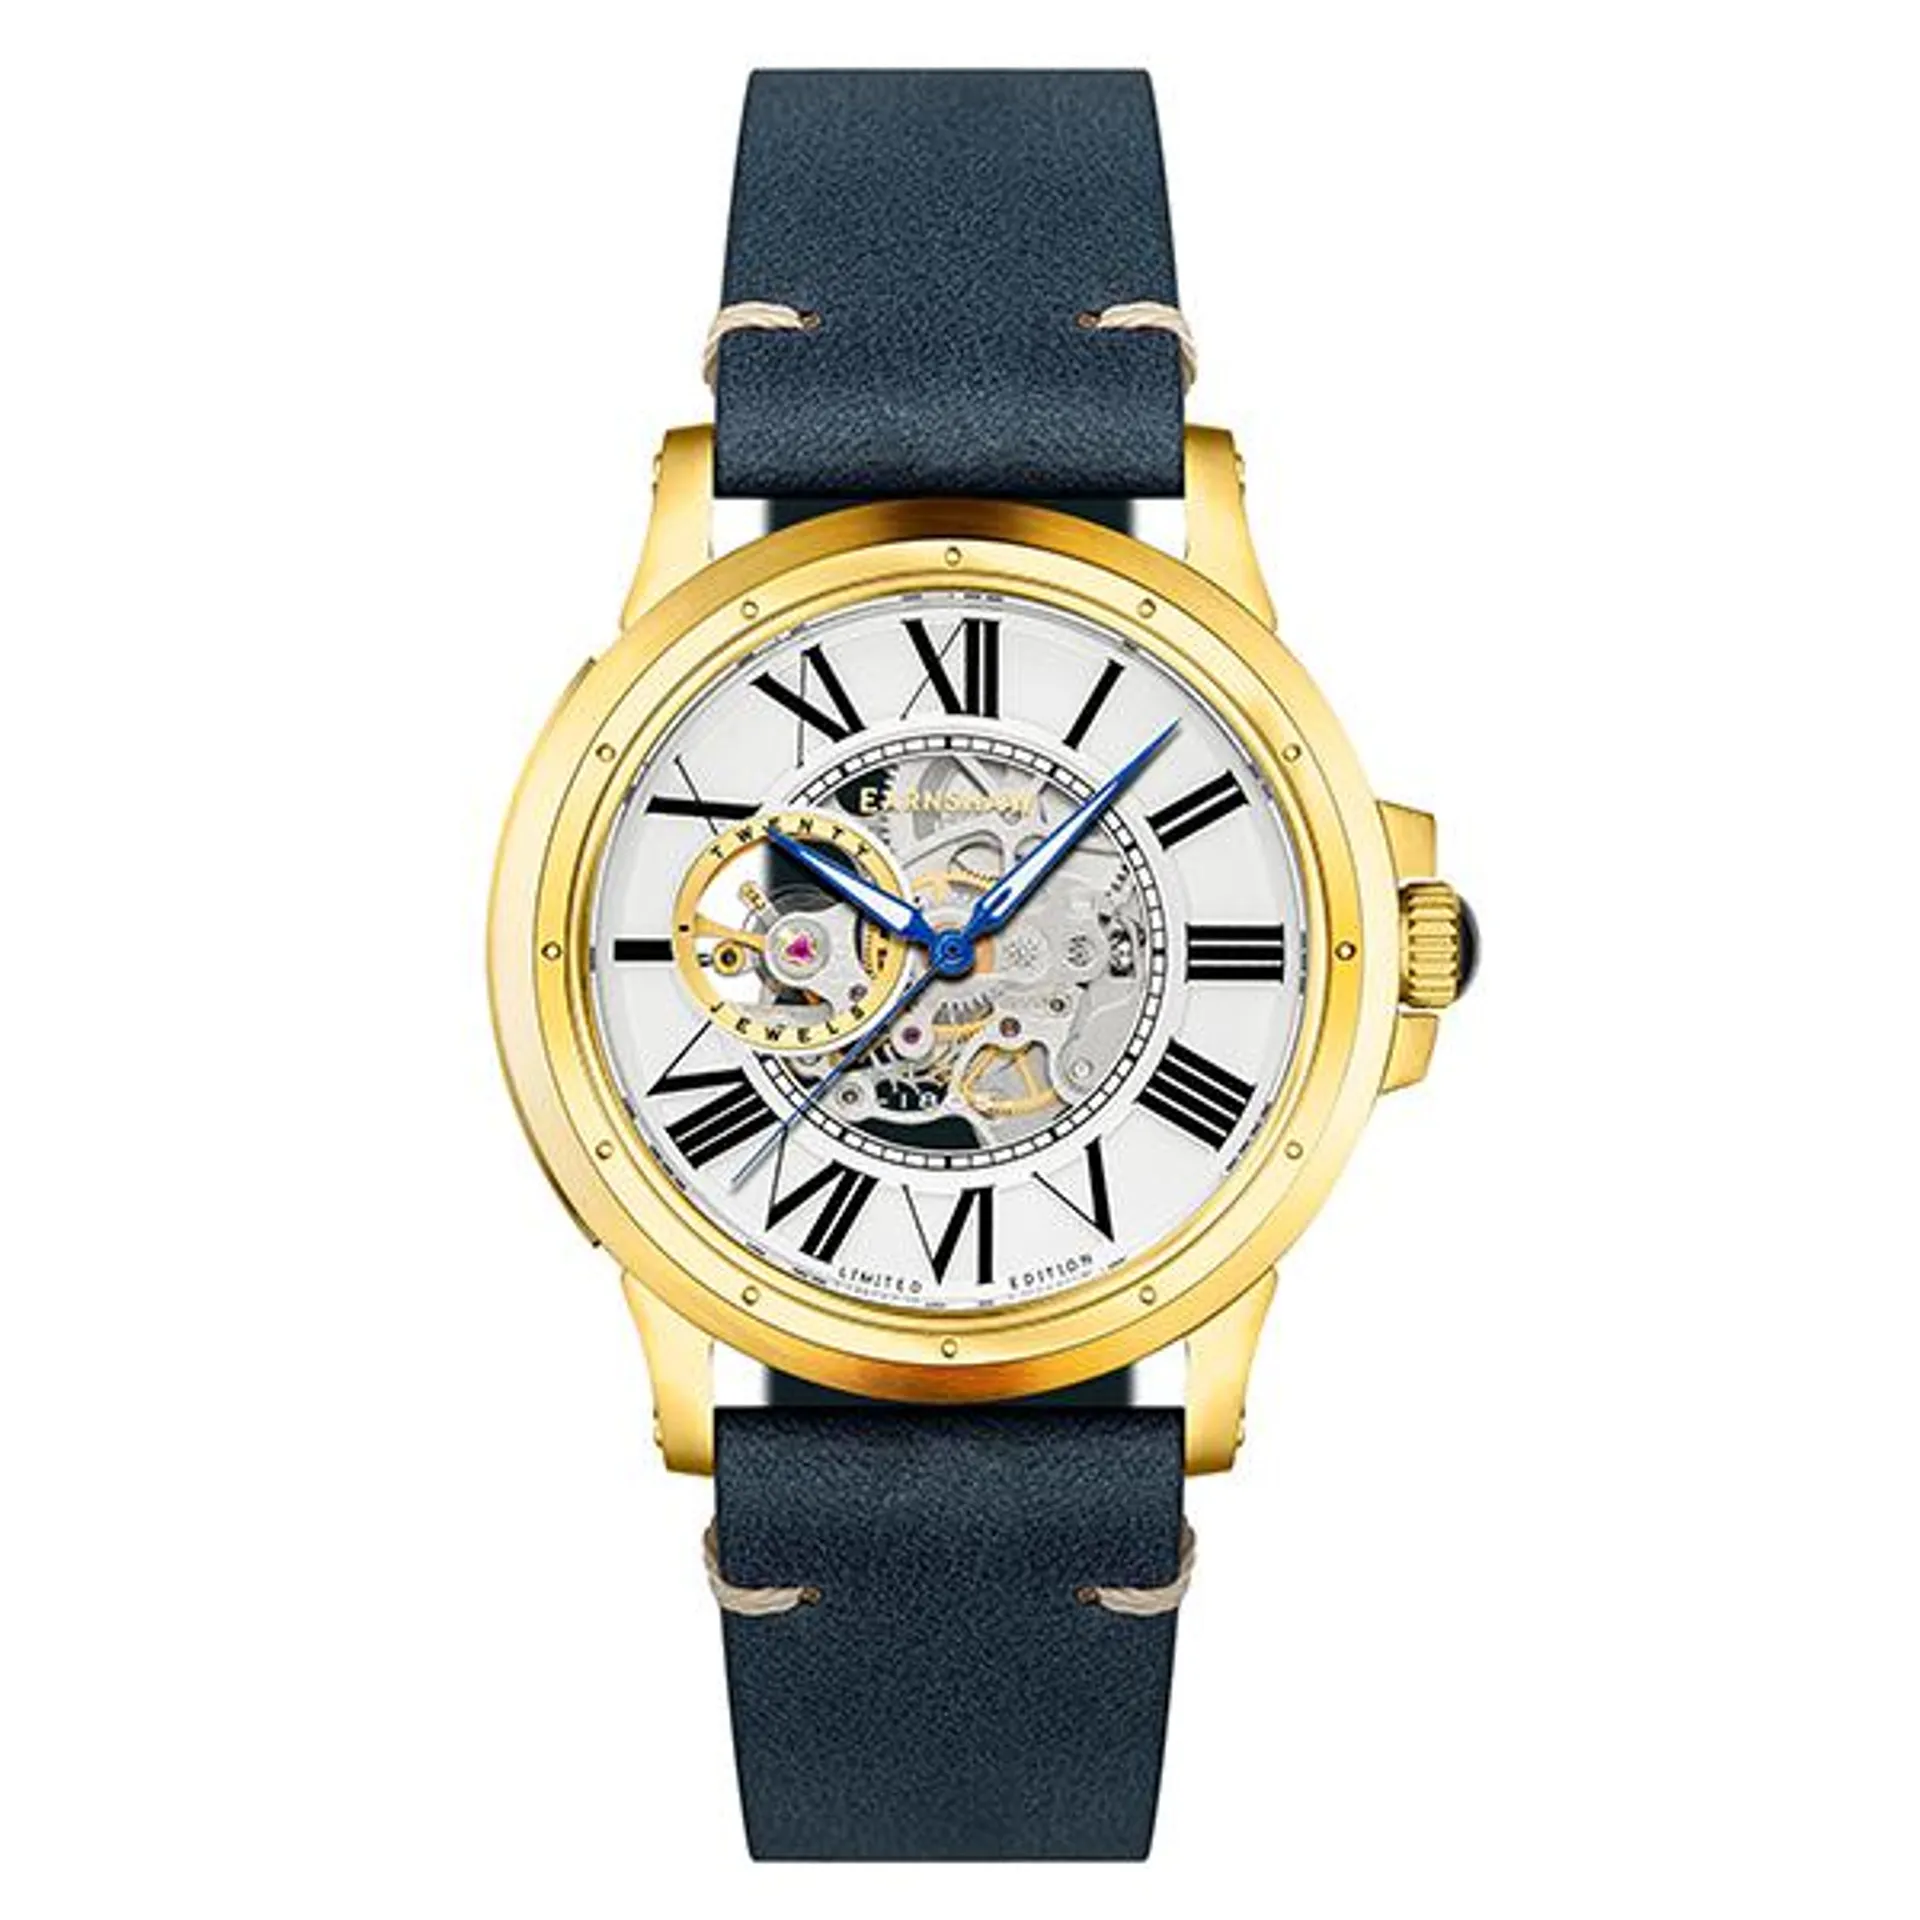 Thomas Earnshaw Gents Comet Open Heart Automatic Skeleton Watch with Genuine Leather Strap